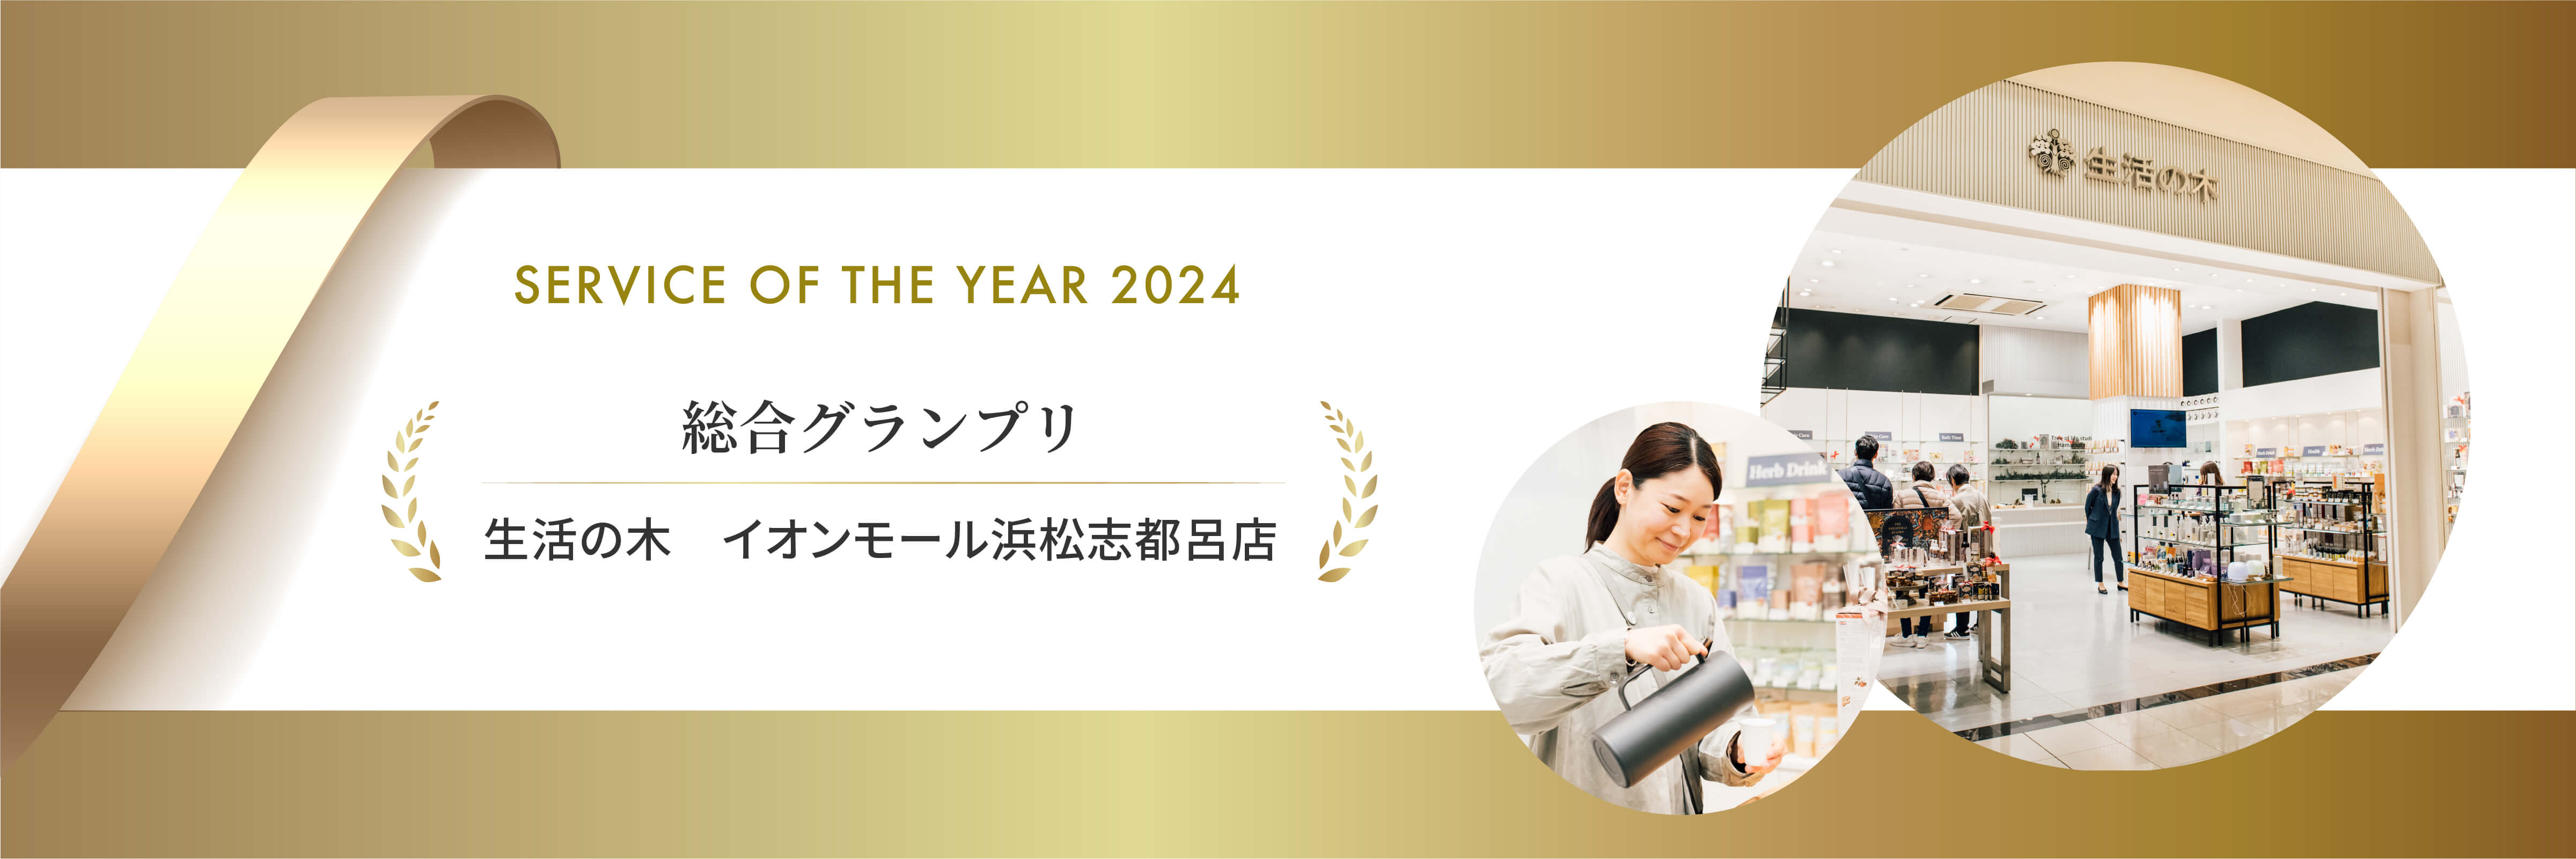 Service ON THE YEAR 2022 物販総合グランプリ　THE BODY SHOP　ルミネ大宮店